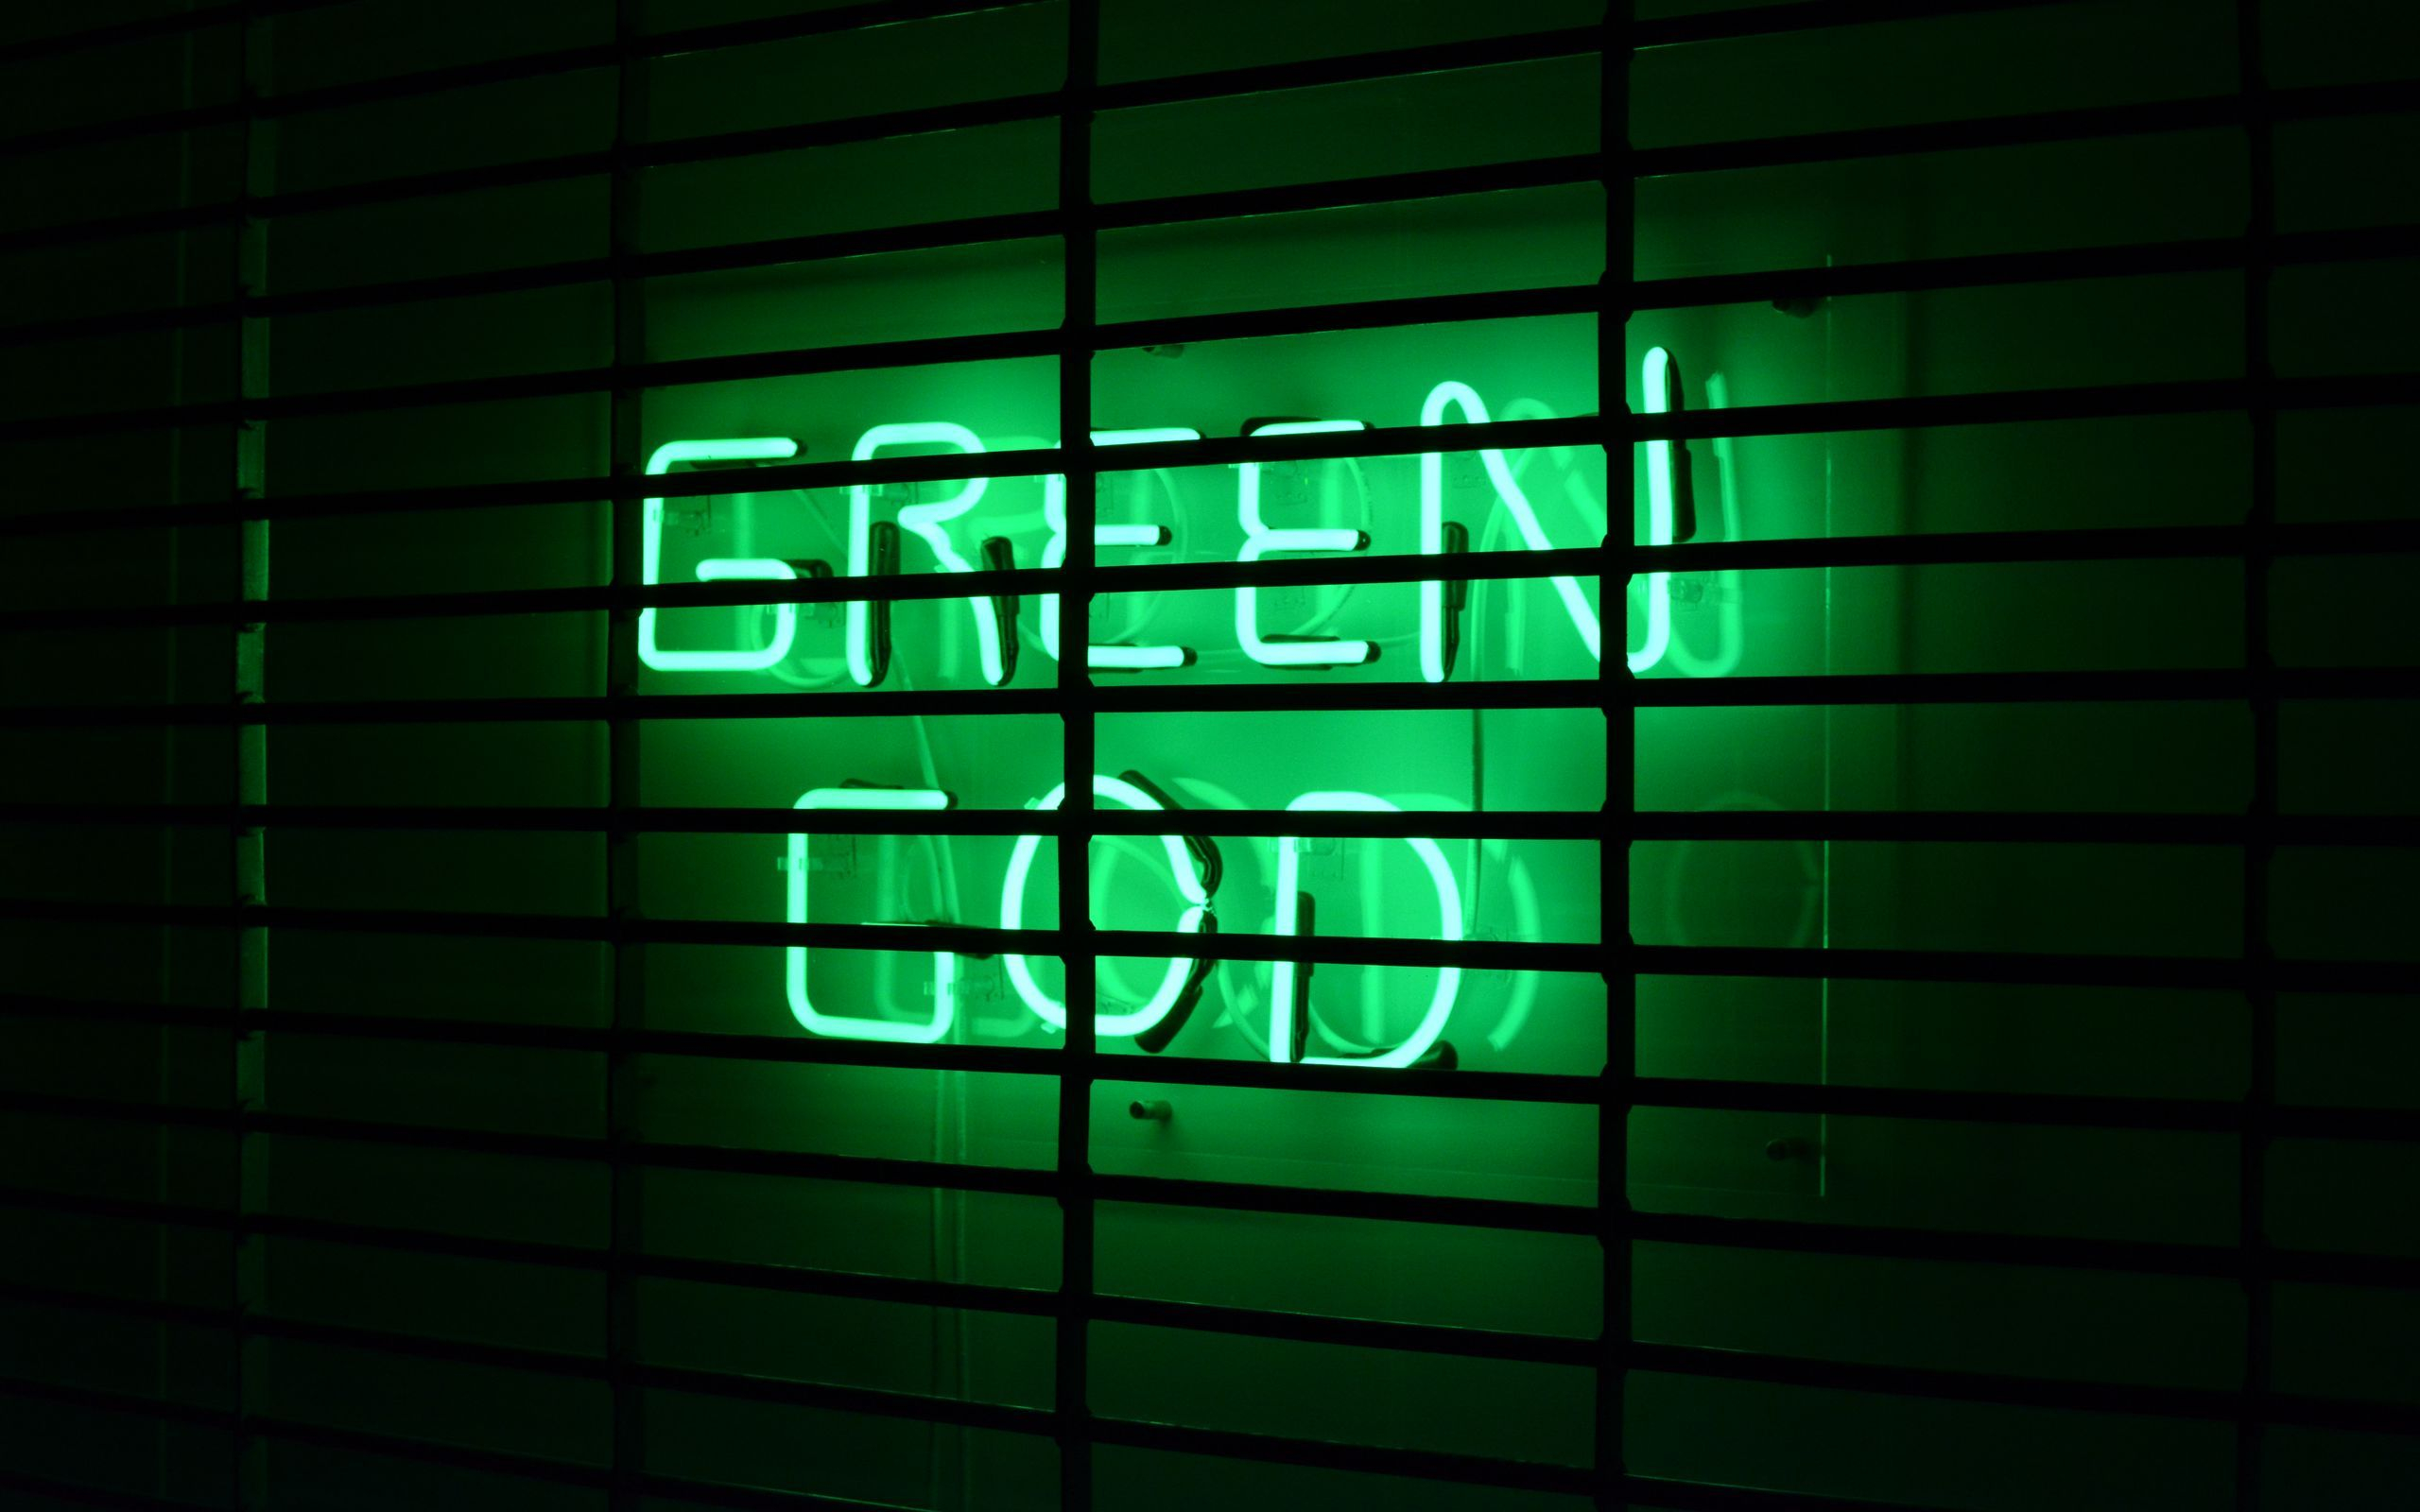 A neon sign in green that reads 